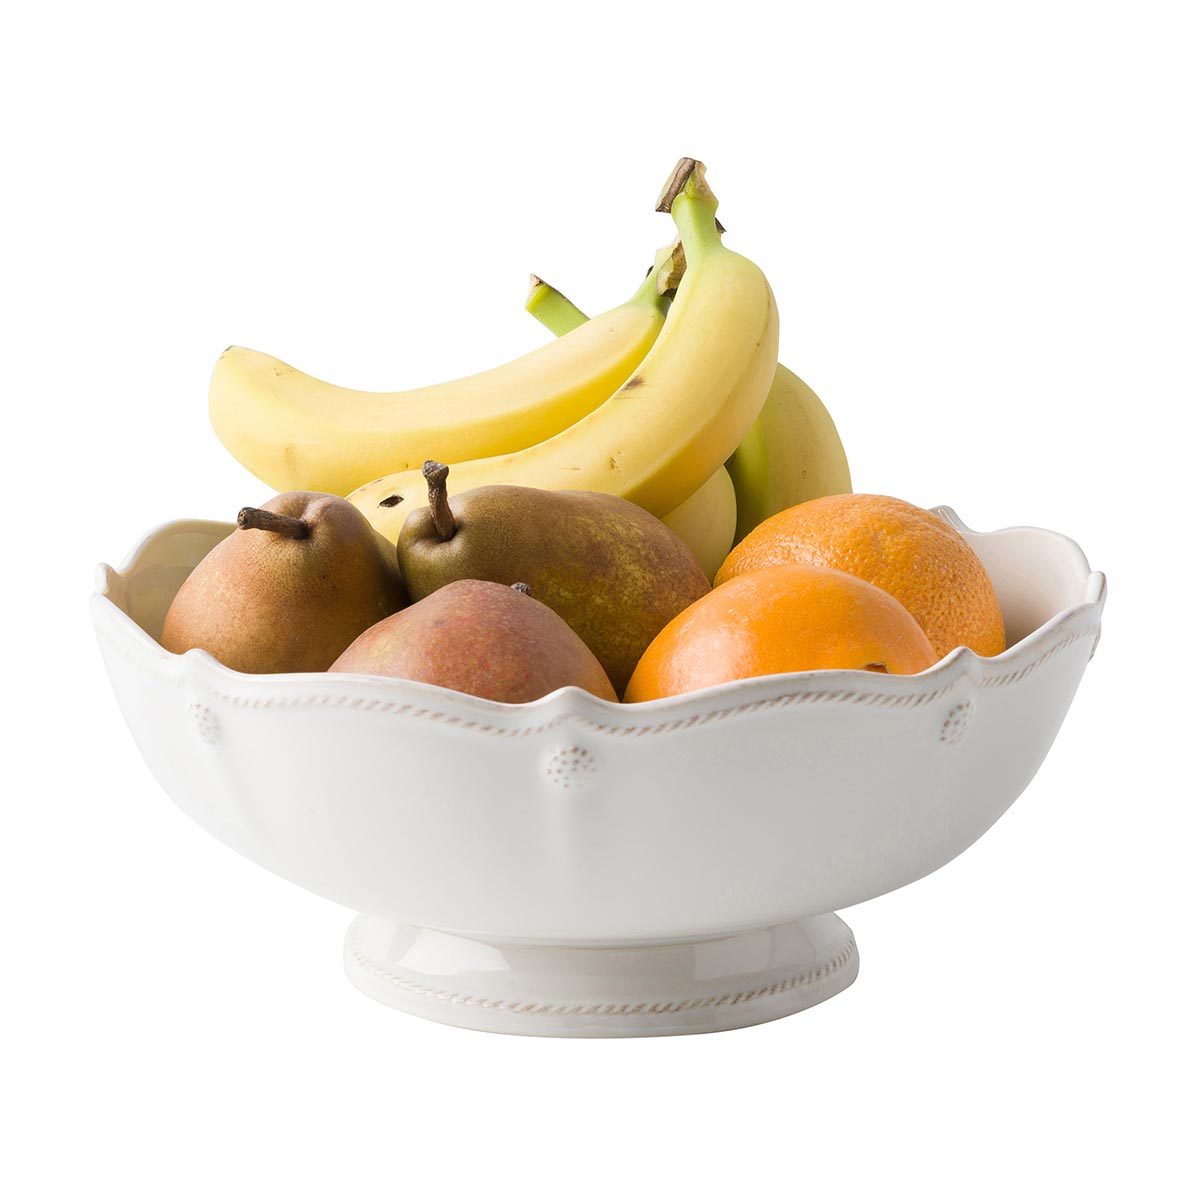 Berry & Thread Footed Fruit Bowl - Whitewash